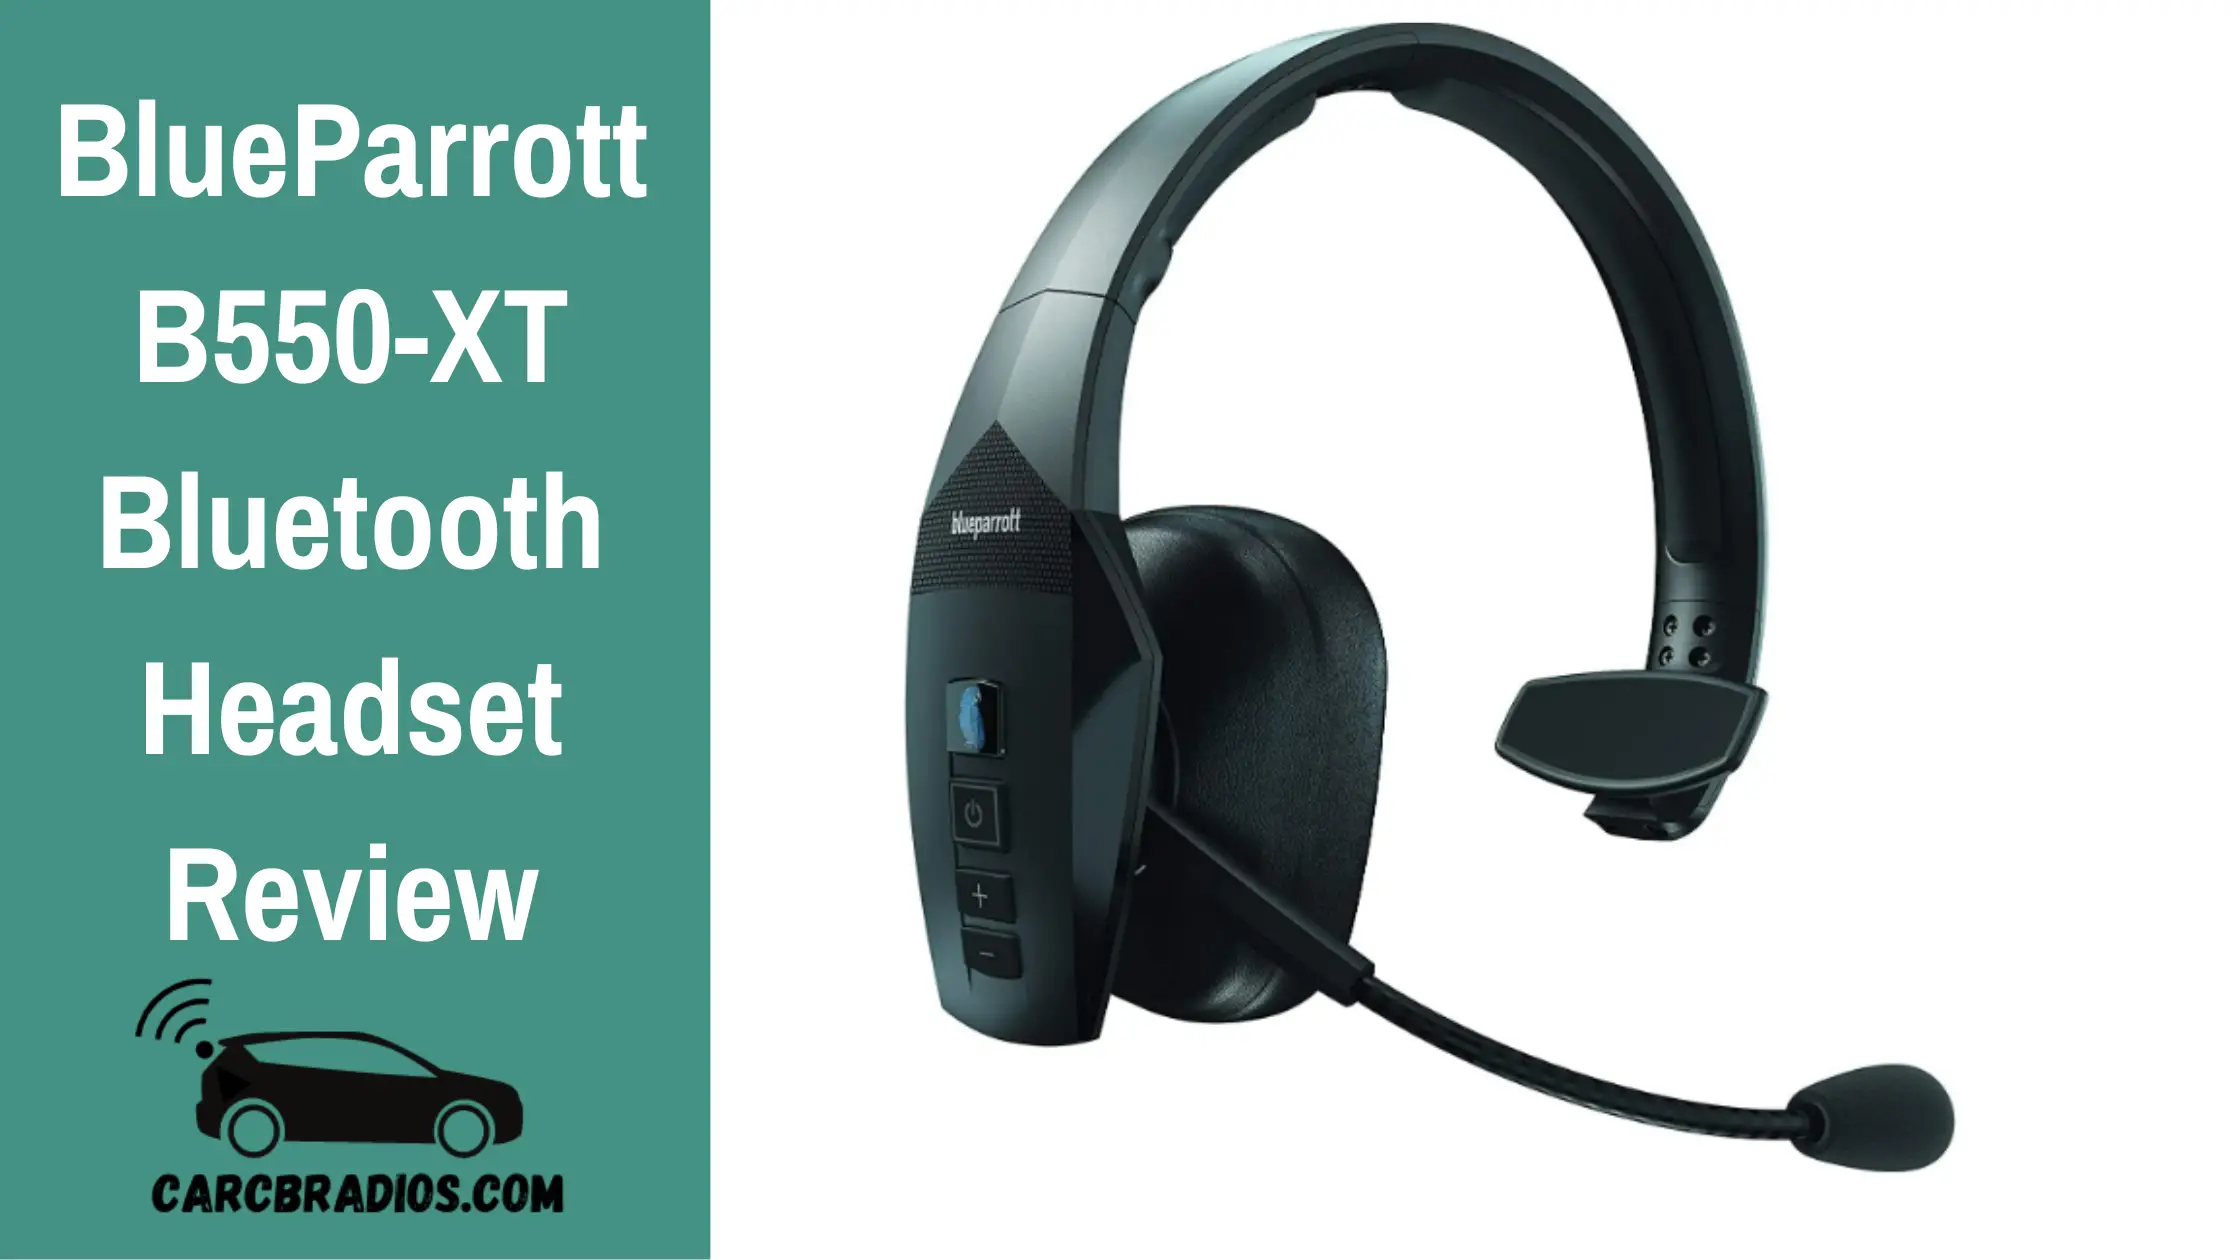 If you're looking for a high-quality Bluetooth headset that delivers industry-leading sound, long battery life, and exceptional comfort, the BlueParrott B550-XT is definitely worth considering.